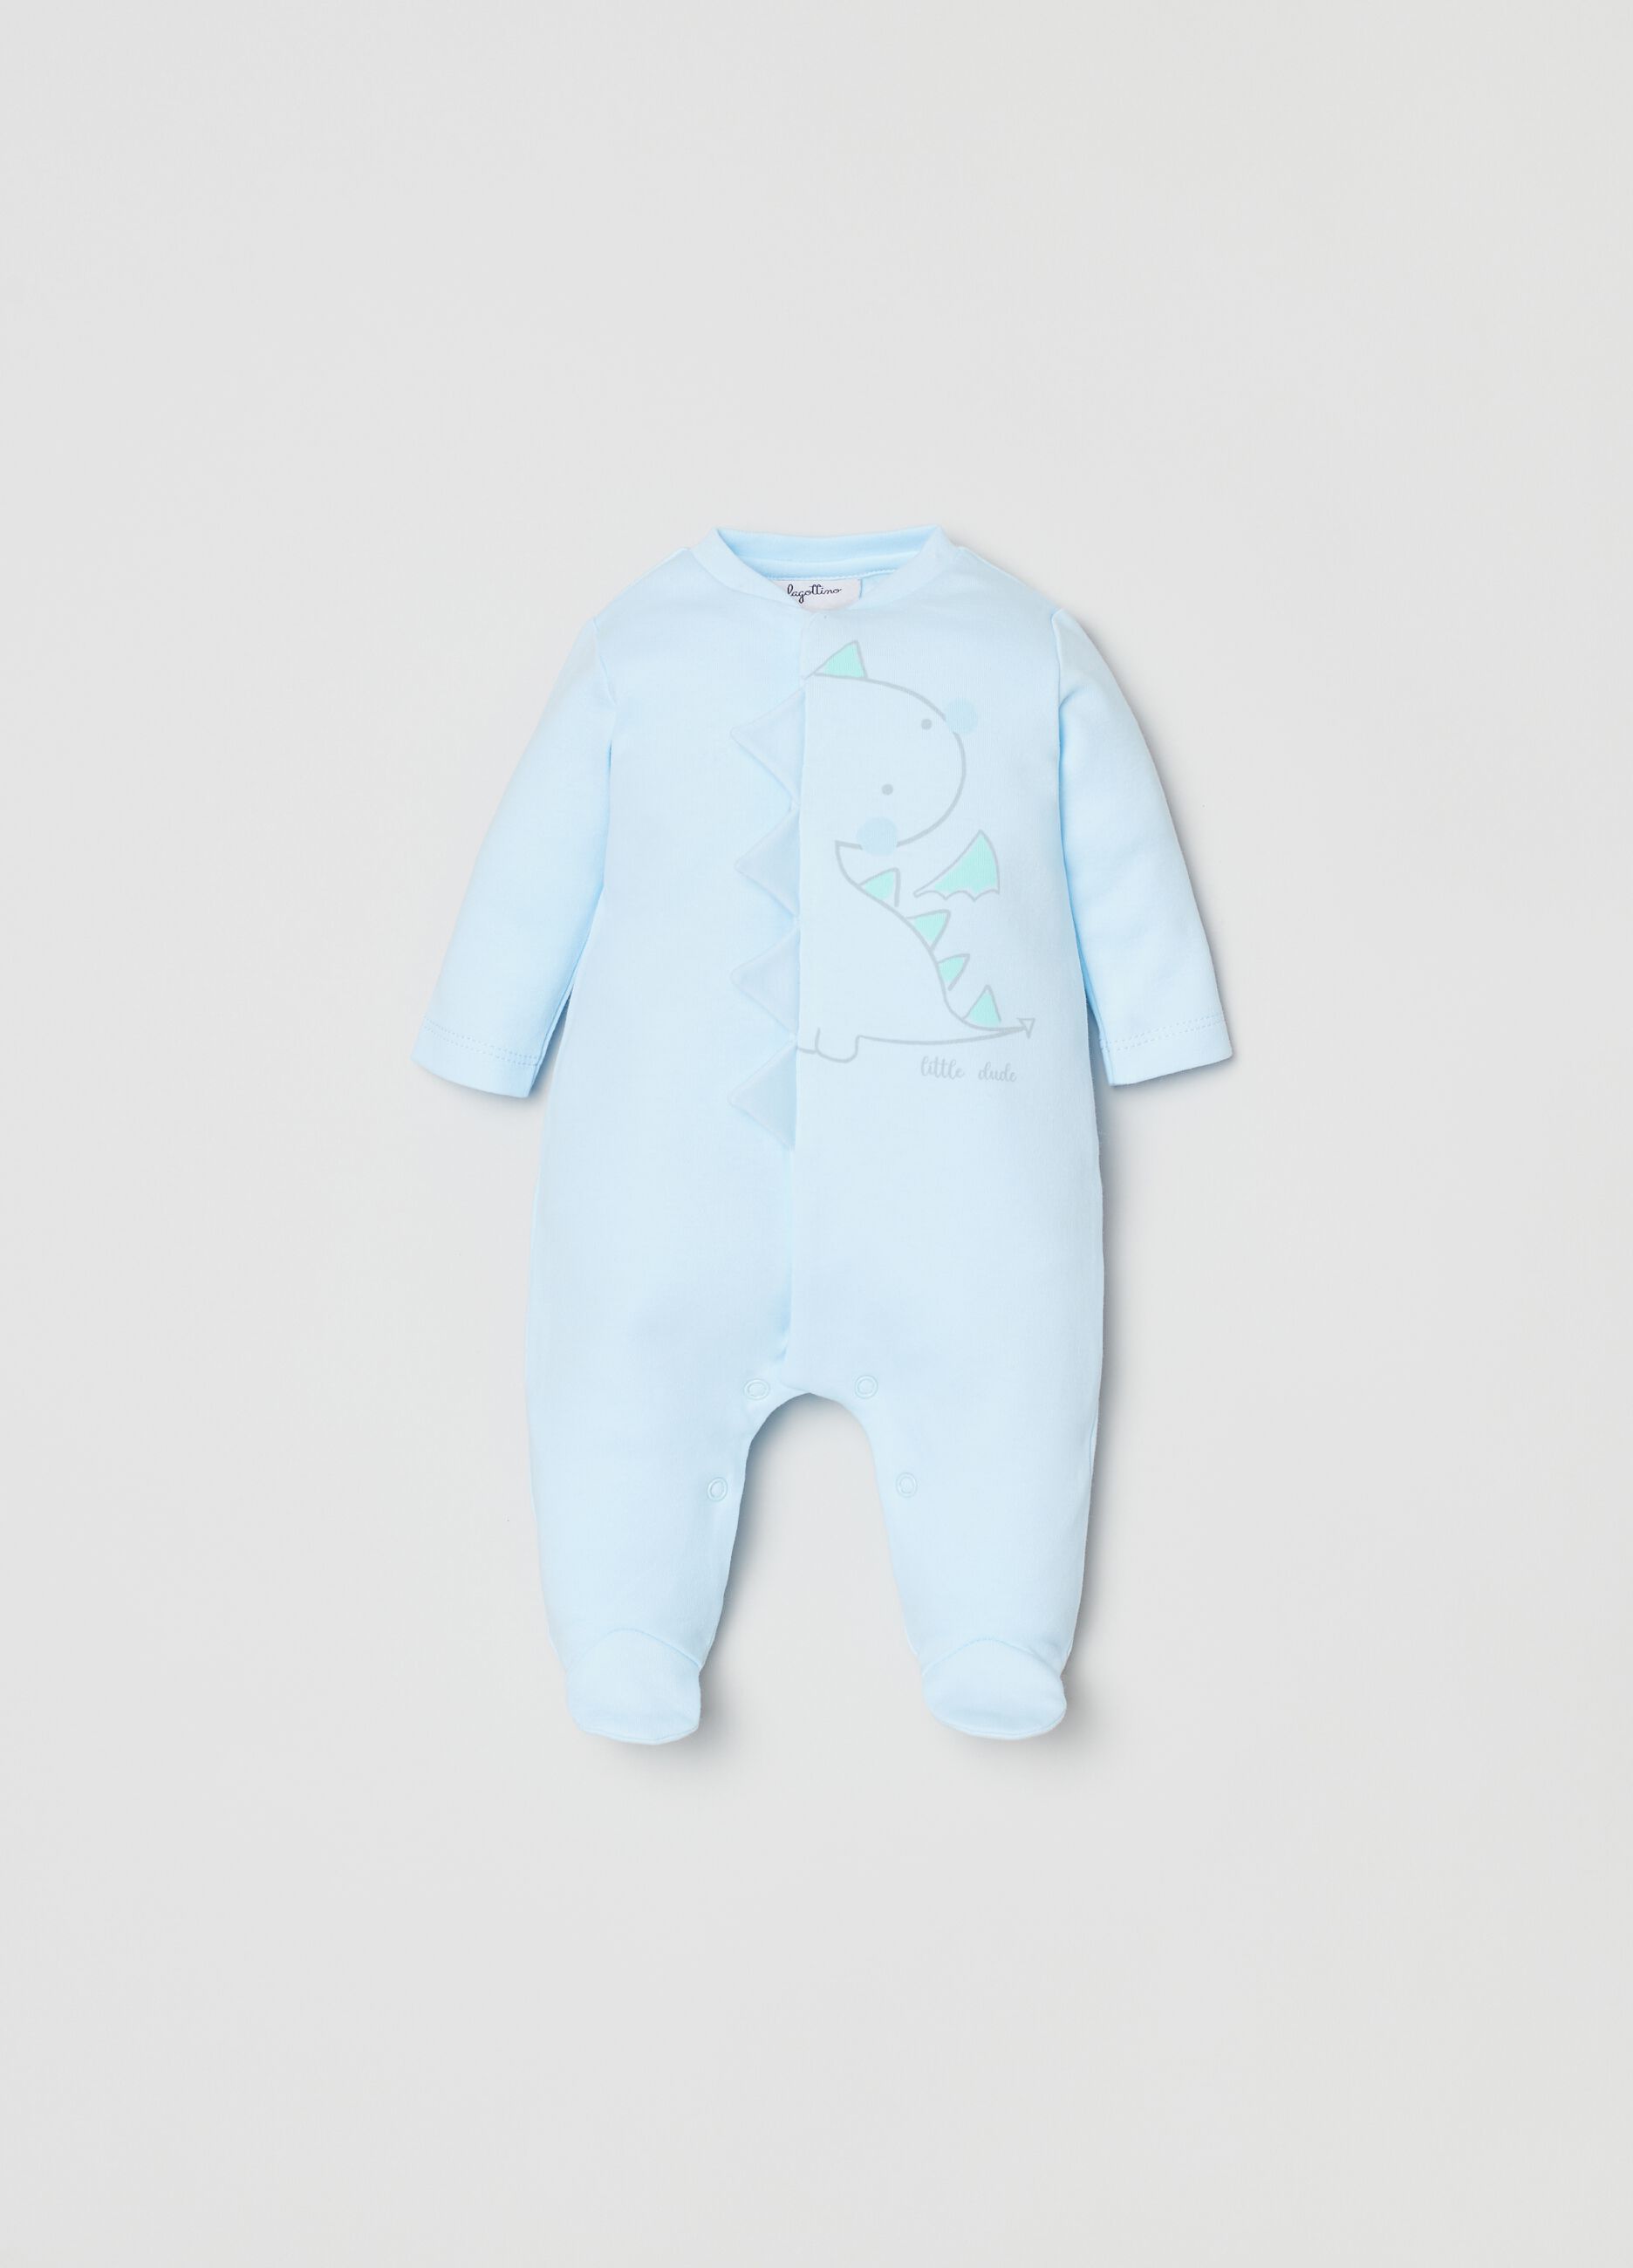 Onesie with printed dragon with crest